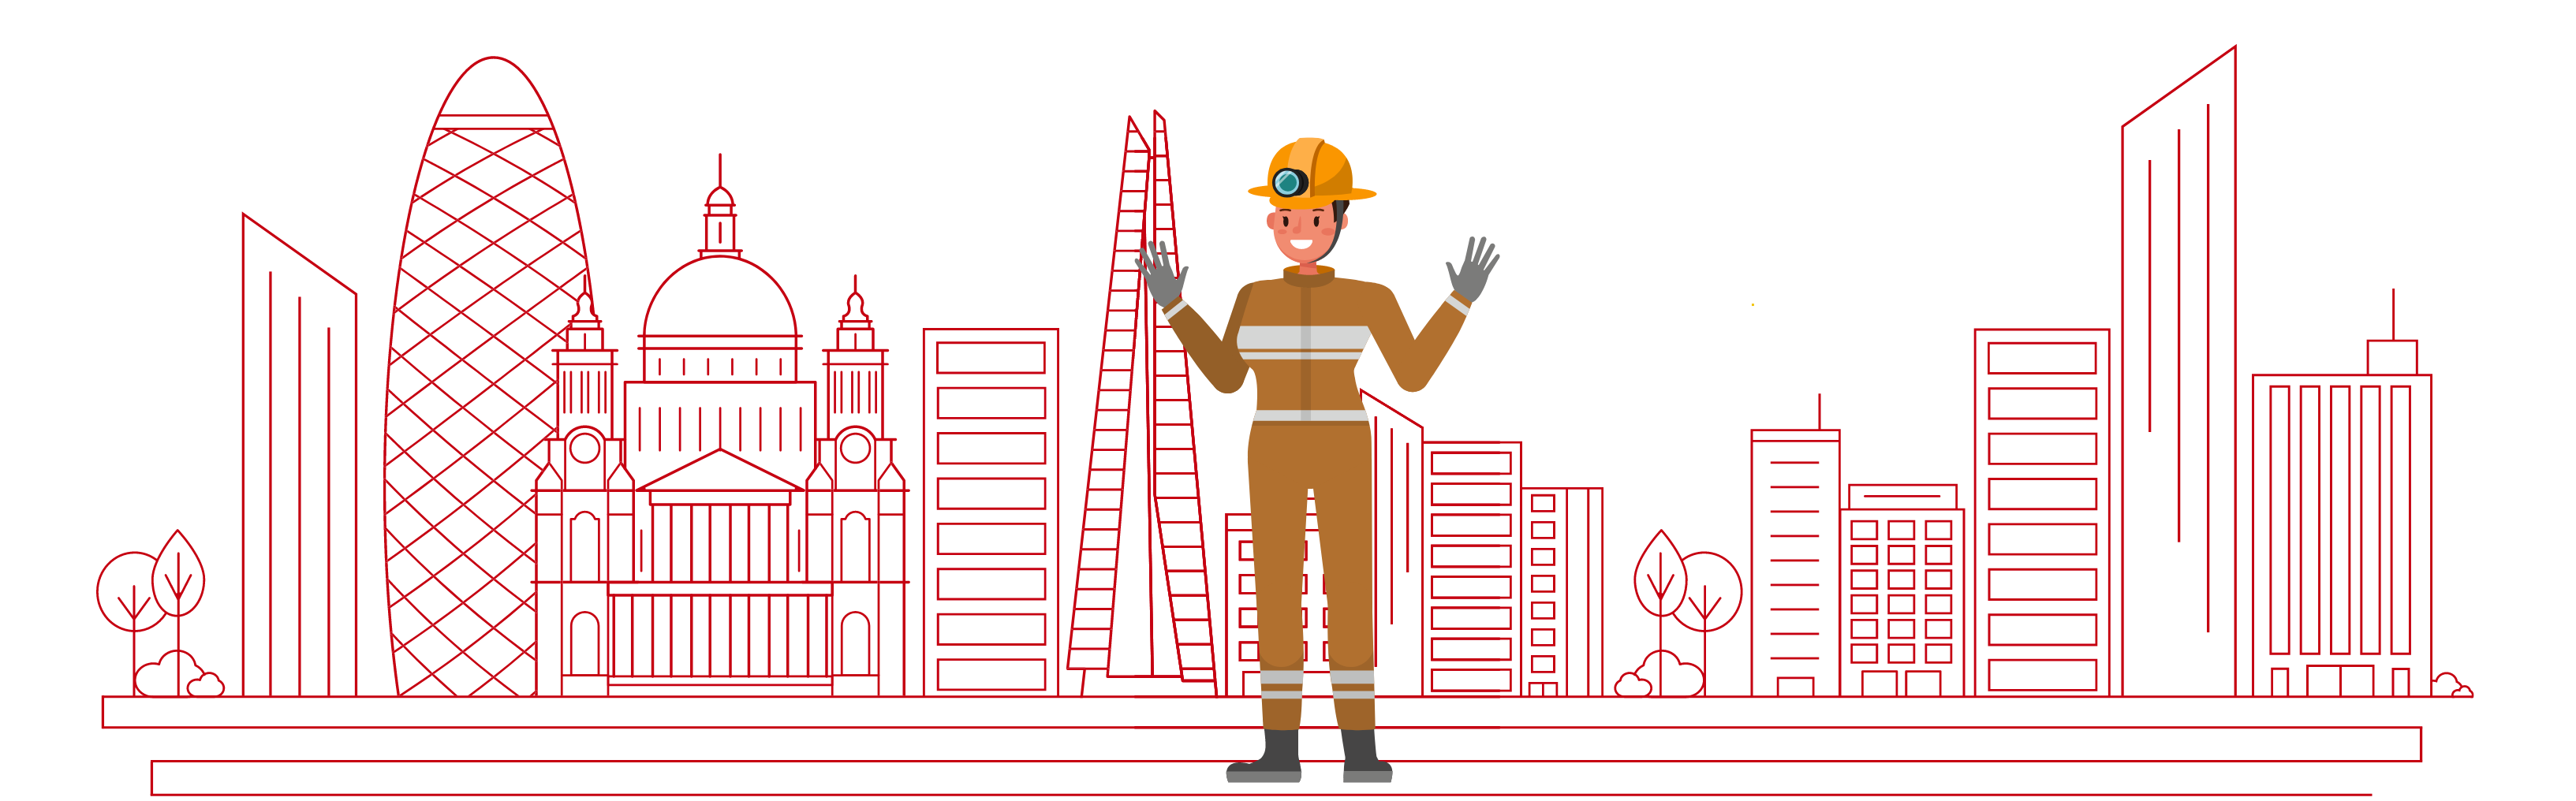 Graphic showing a firewoman in front of a city skyline